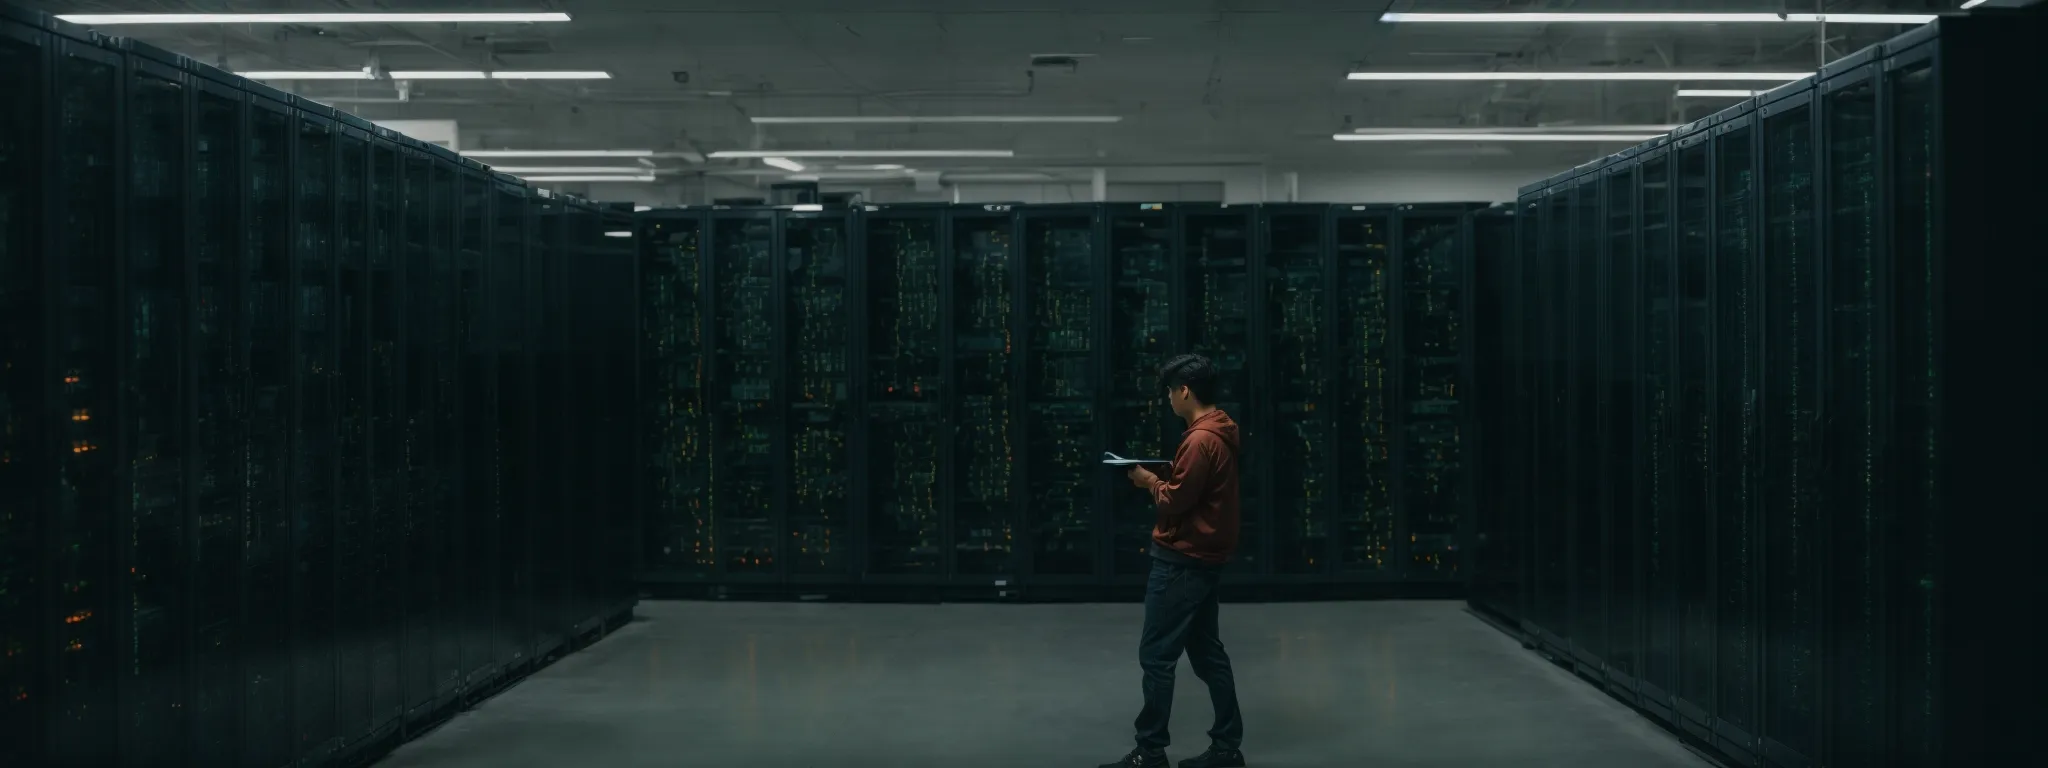 a web developer scrutinizes a large, visible server room while contemplating the architecture of a website's sitemap.